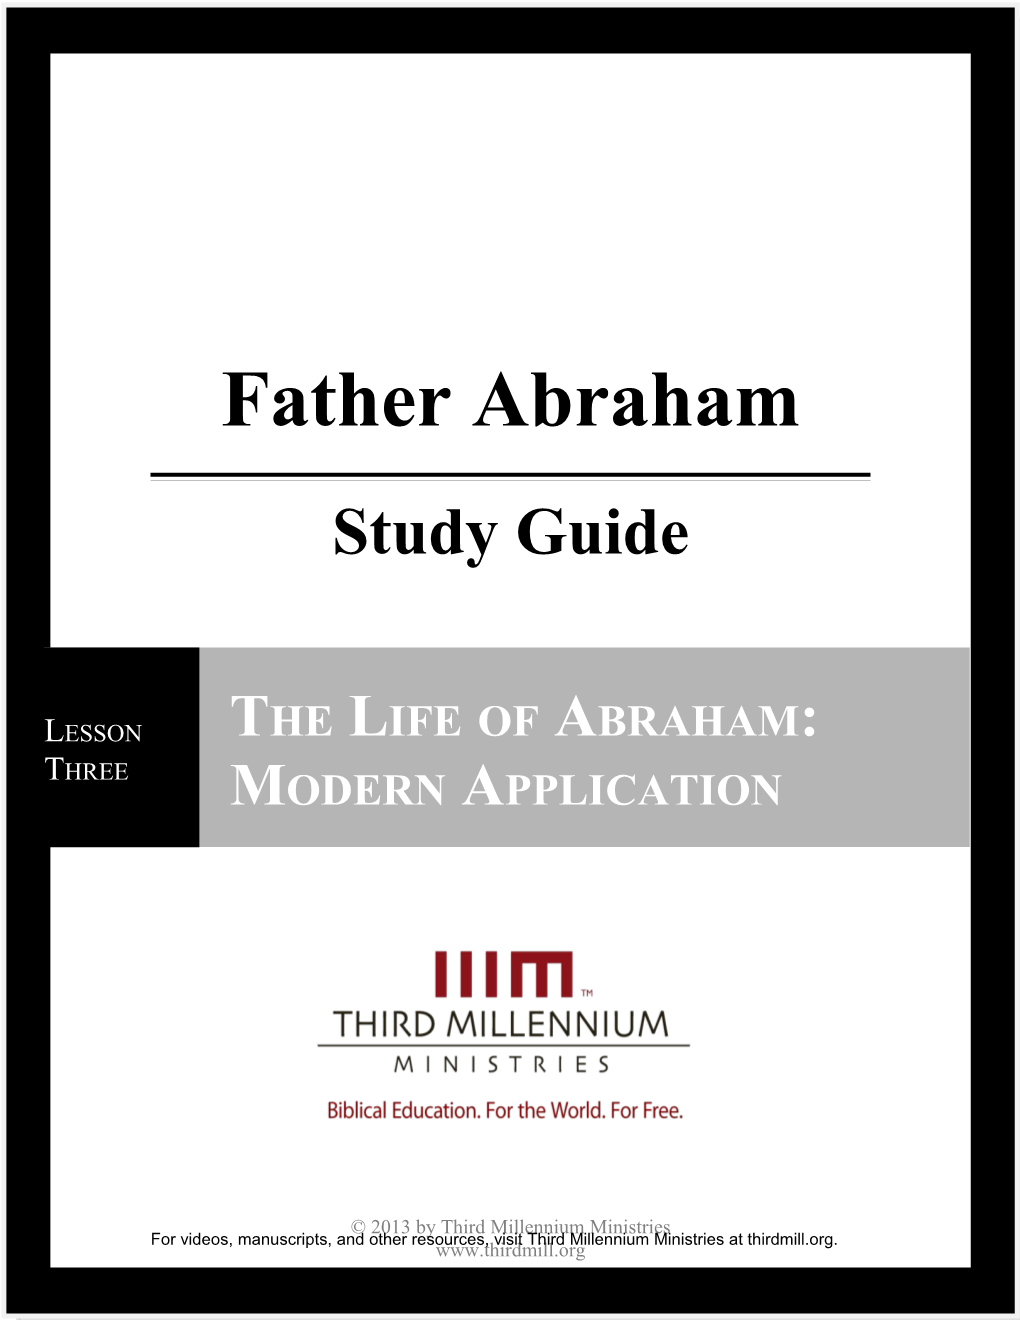 Lesson 3: the Life of Abraham: Modern Application